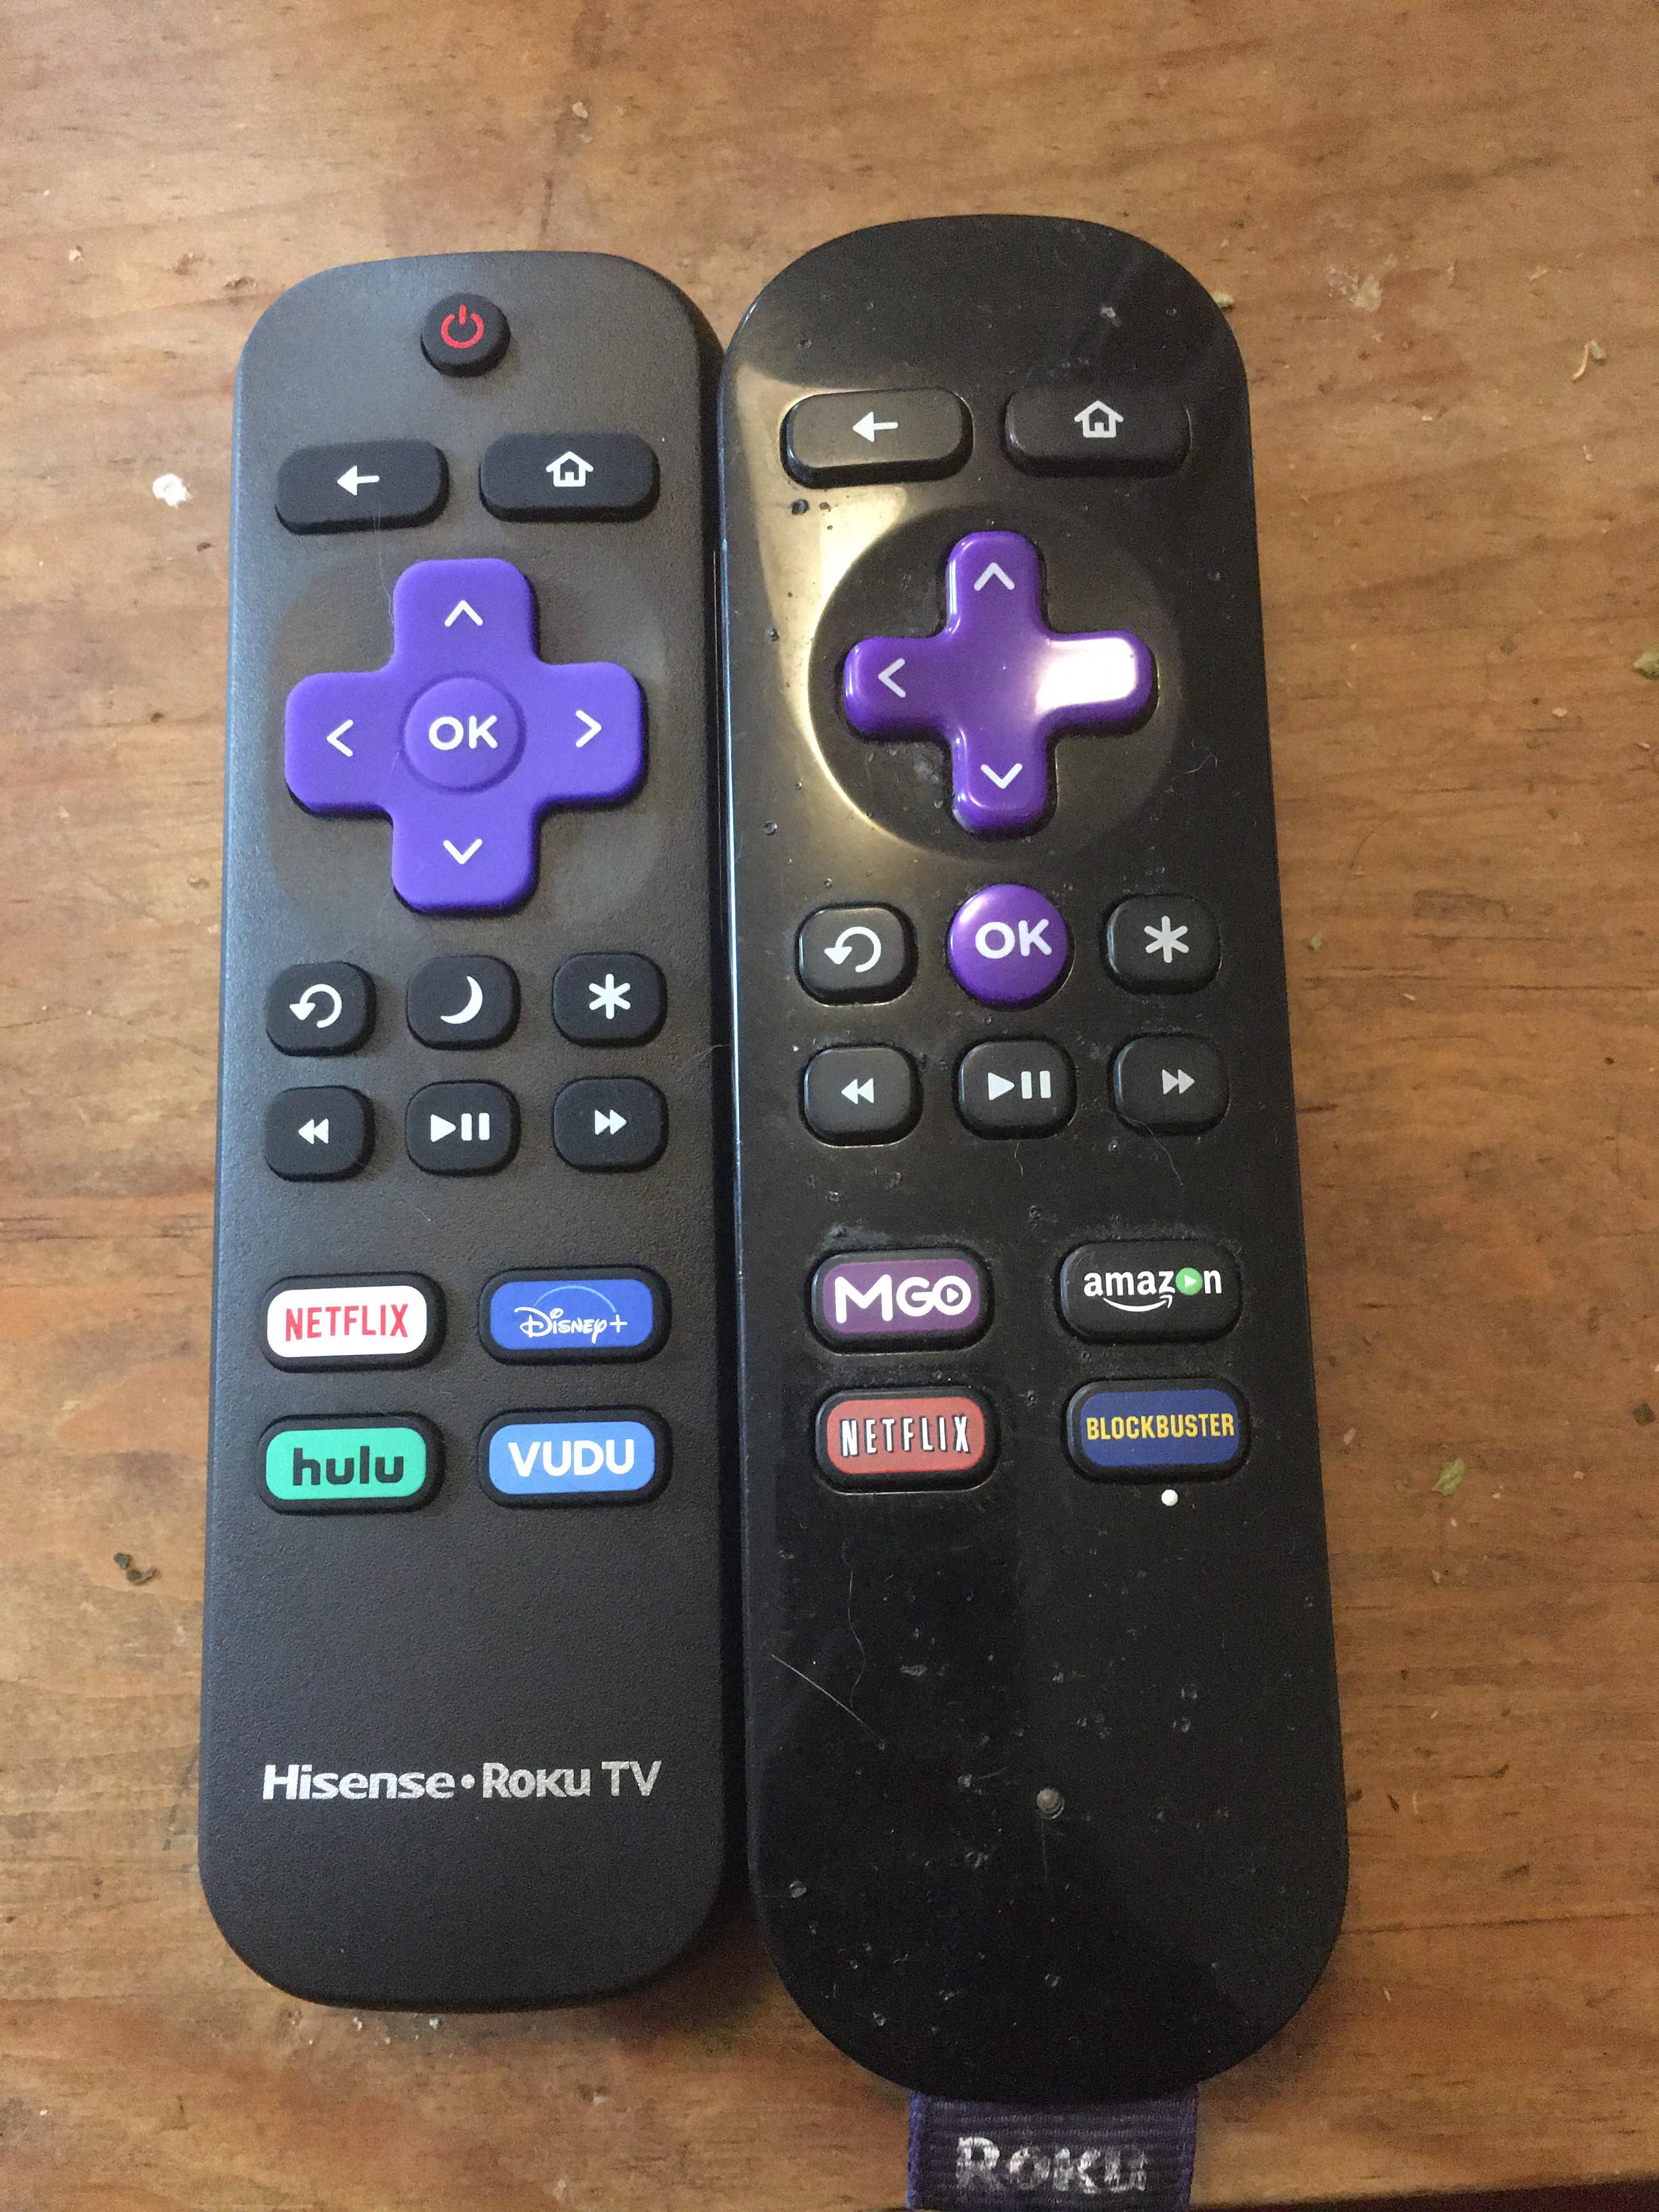 We upgraded tv’s today. Our remote is now relevant.